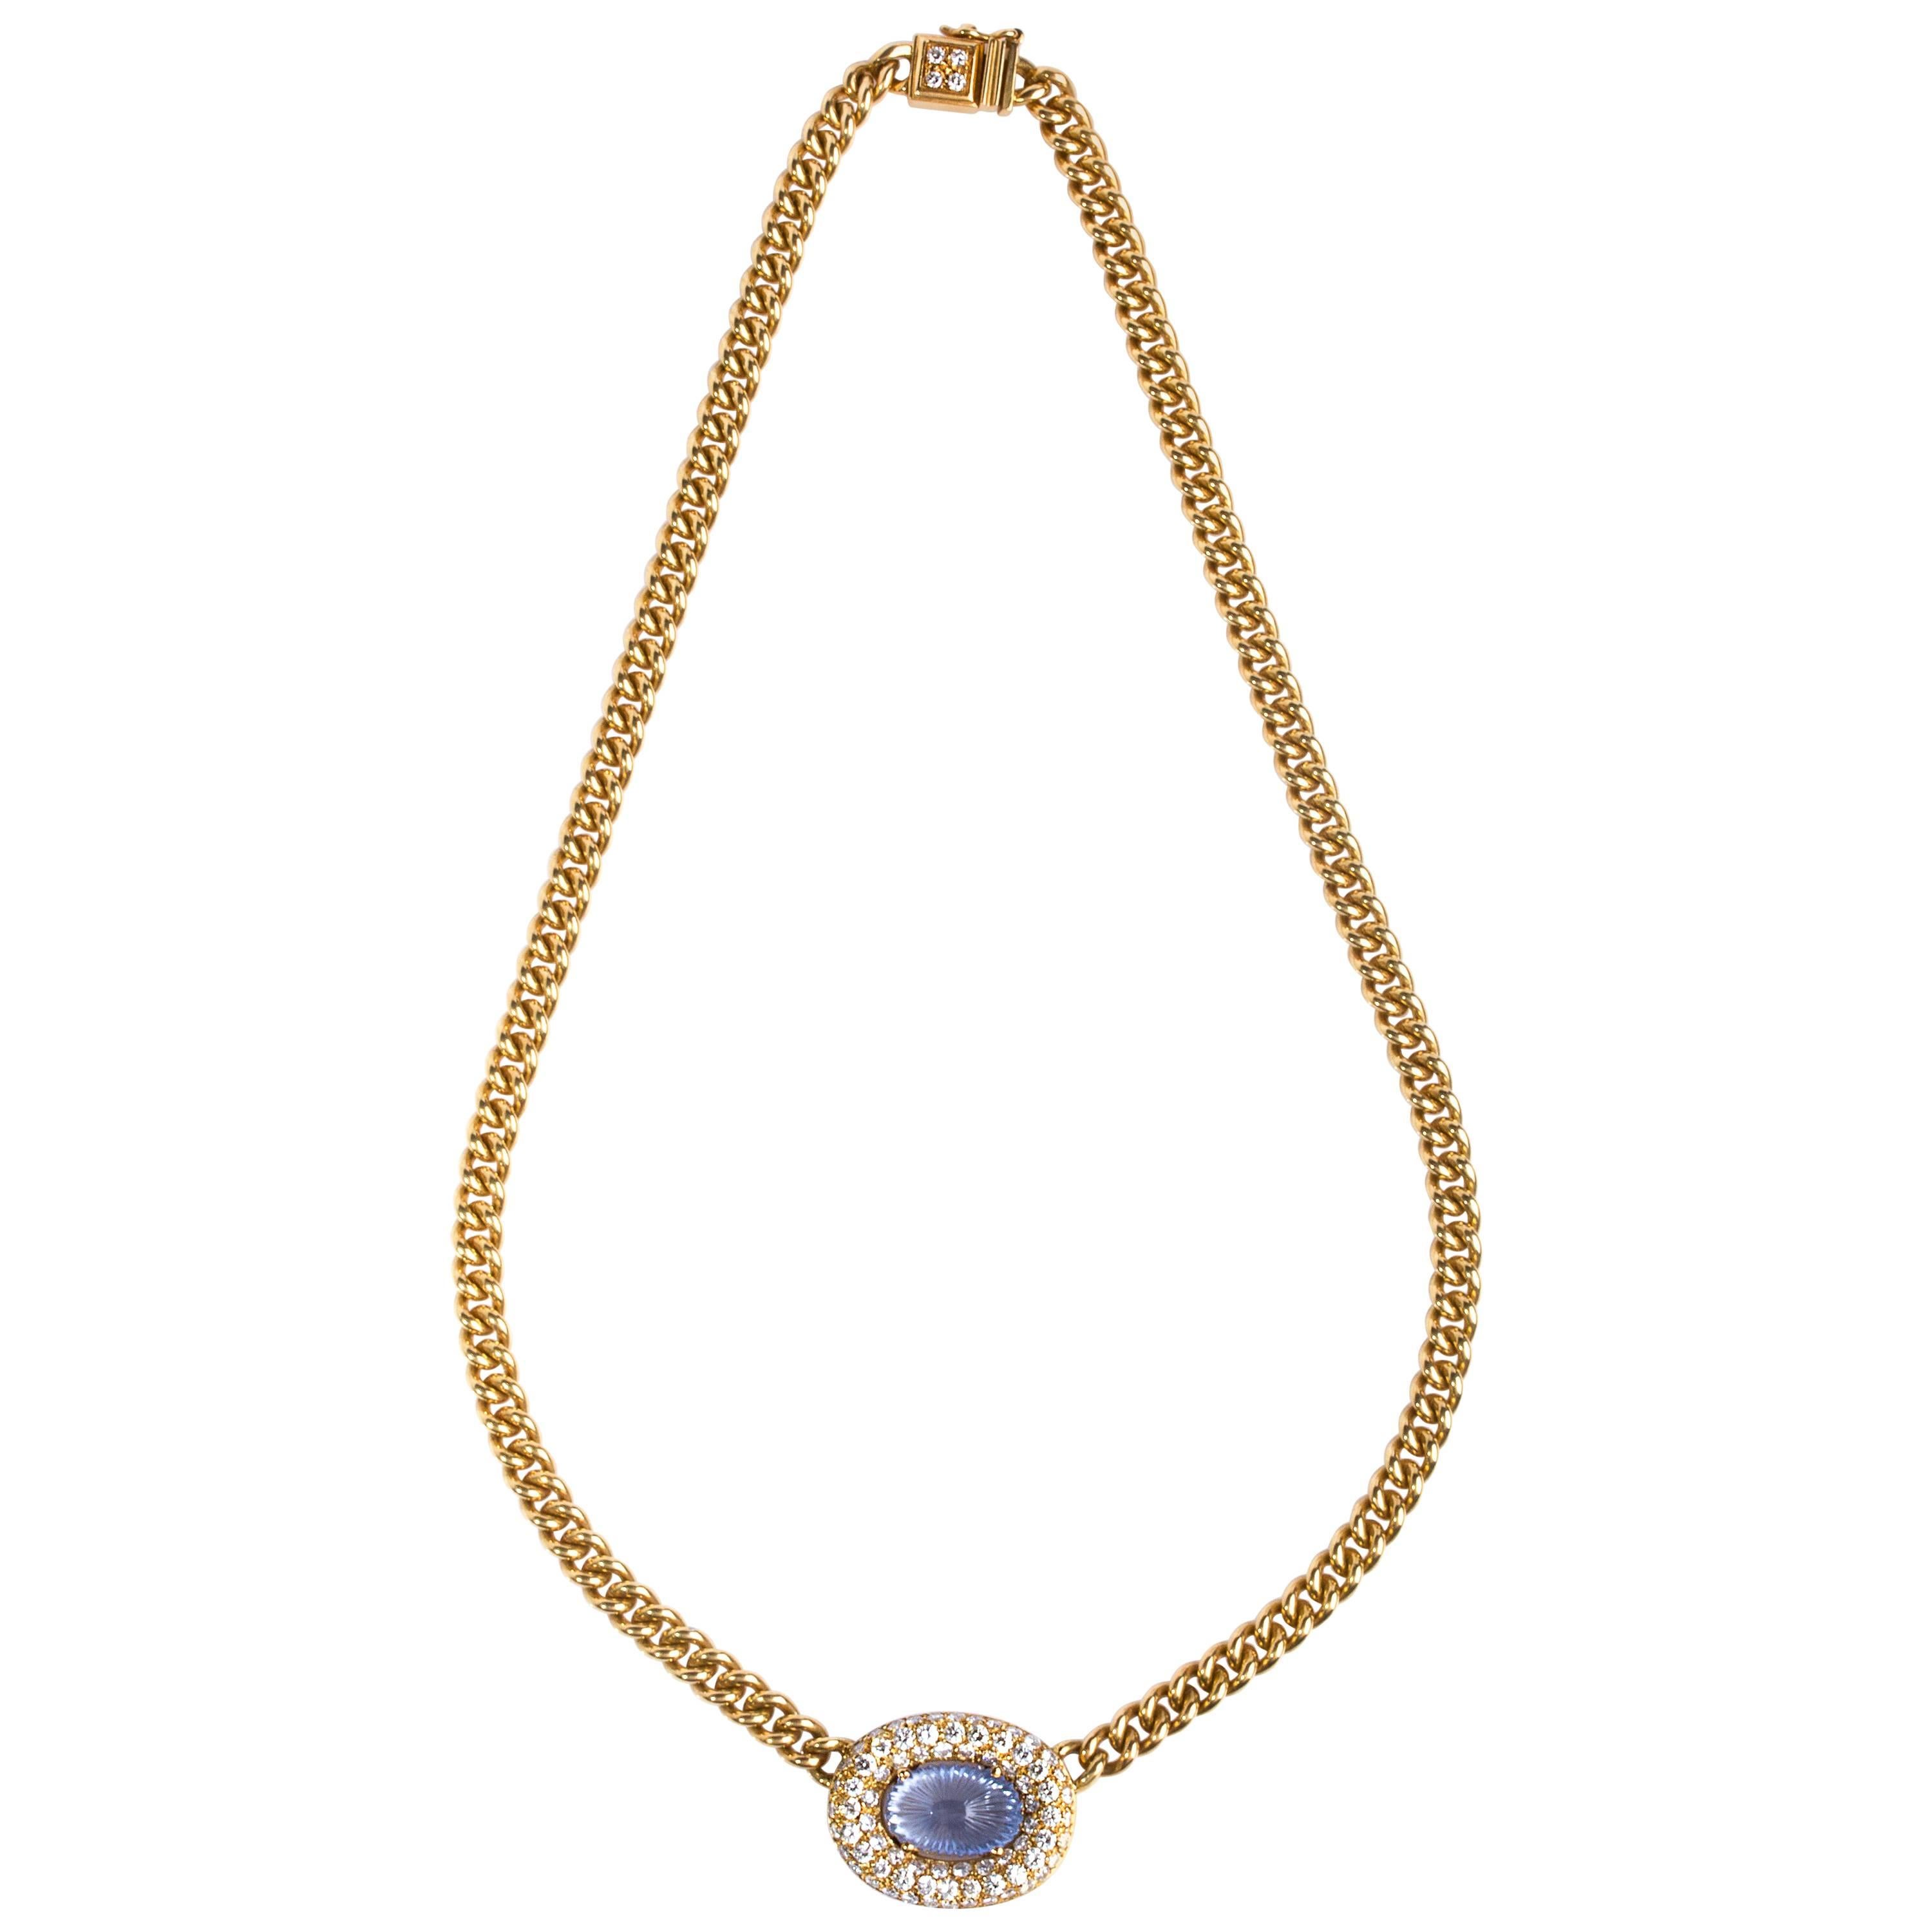 Carved Sapphire Embellished with Pavè Diamond For Sale